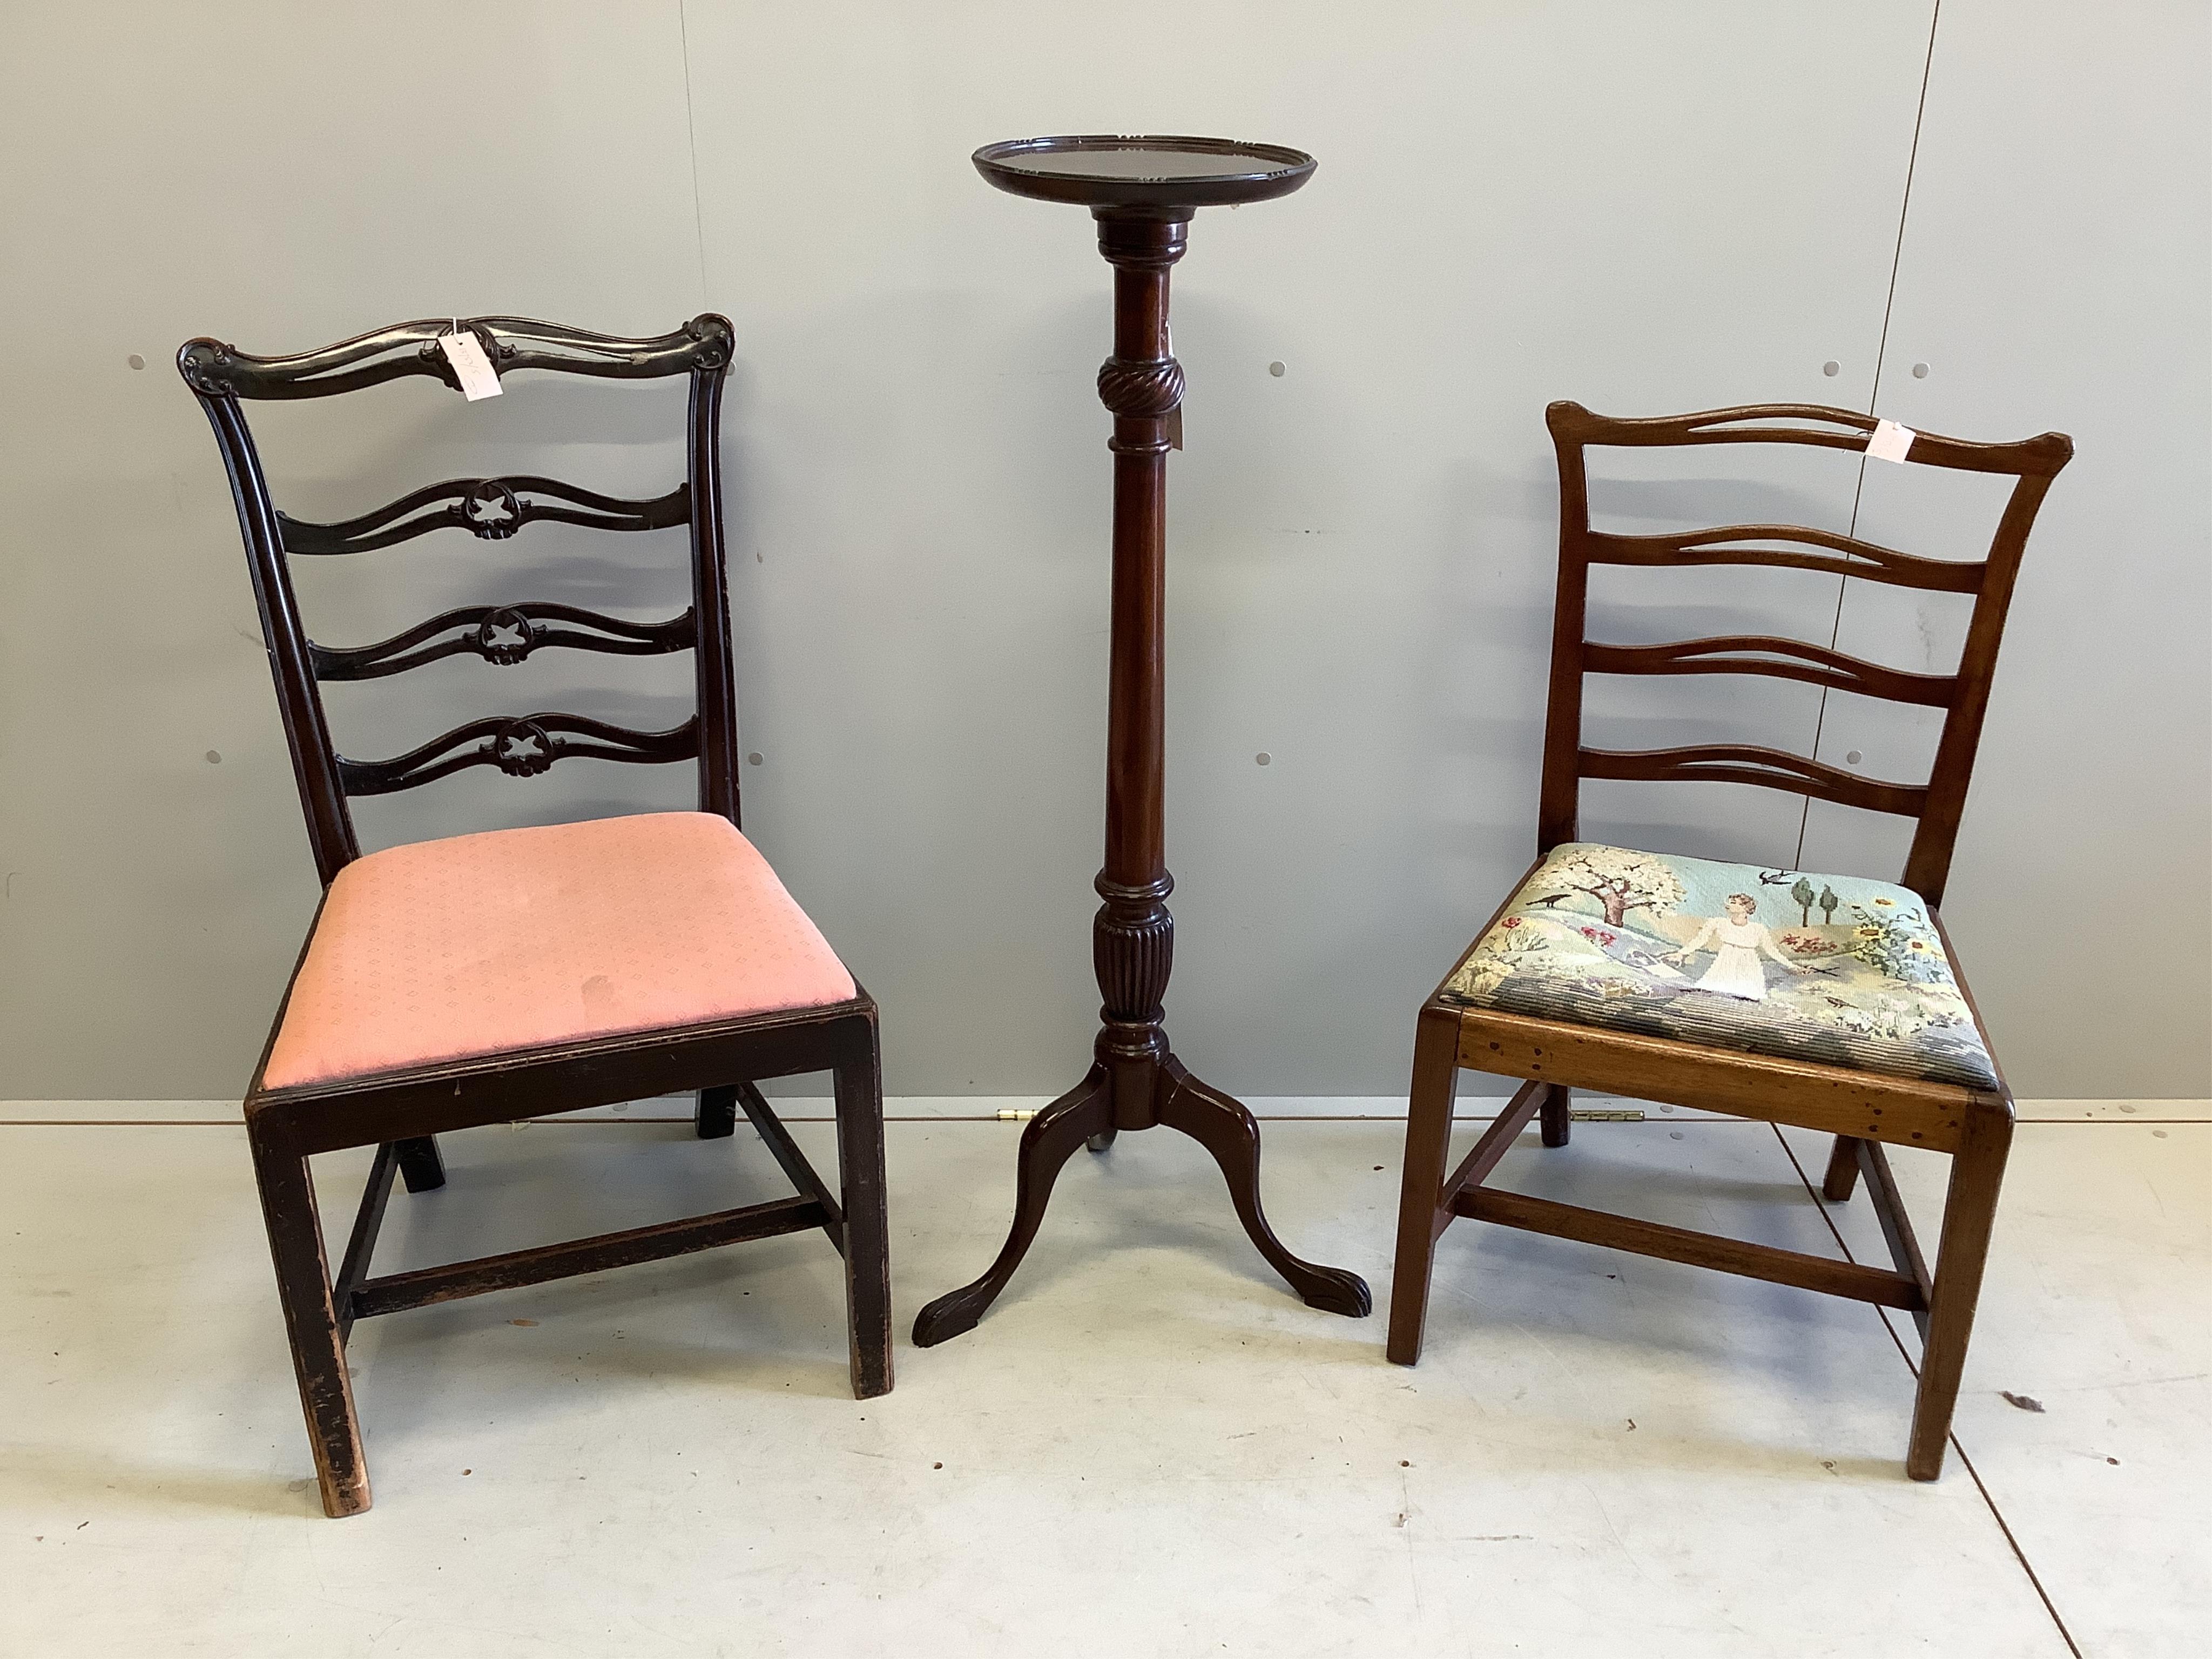 A 19th century mahogany ladderback dining chair with needlework seat, another ladderback chair and a mahogany torchere on tripod base